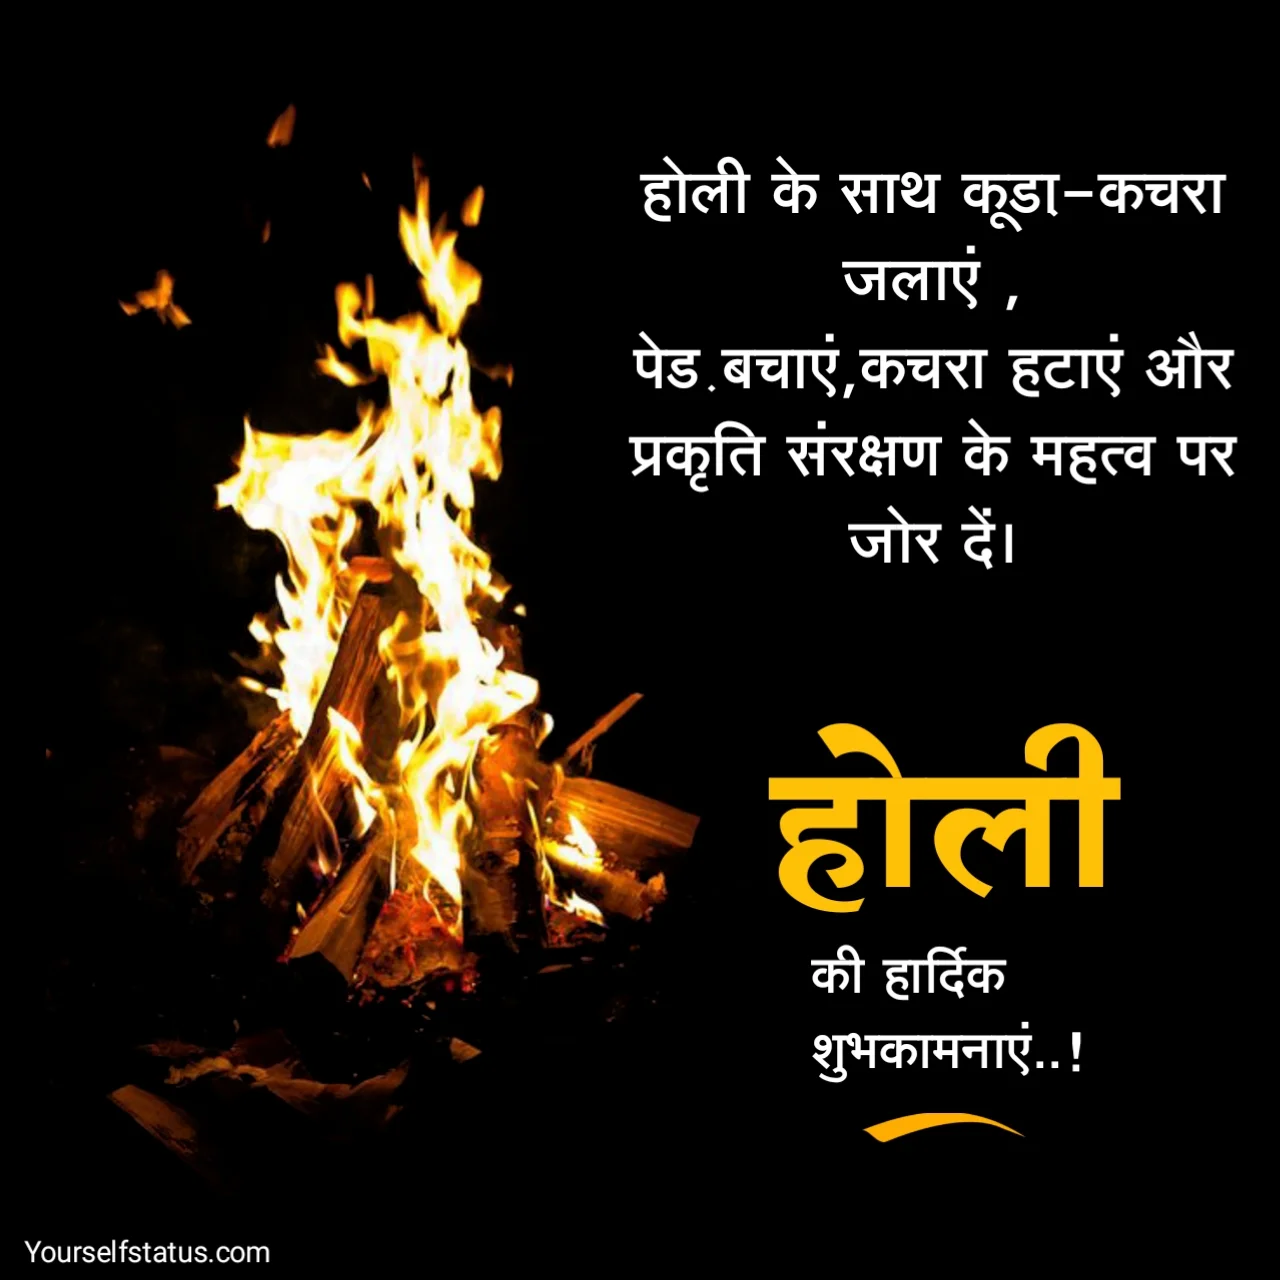 Holi images with quotes in hindi